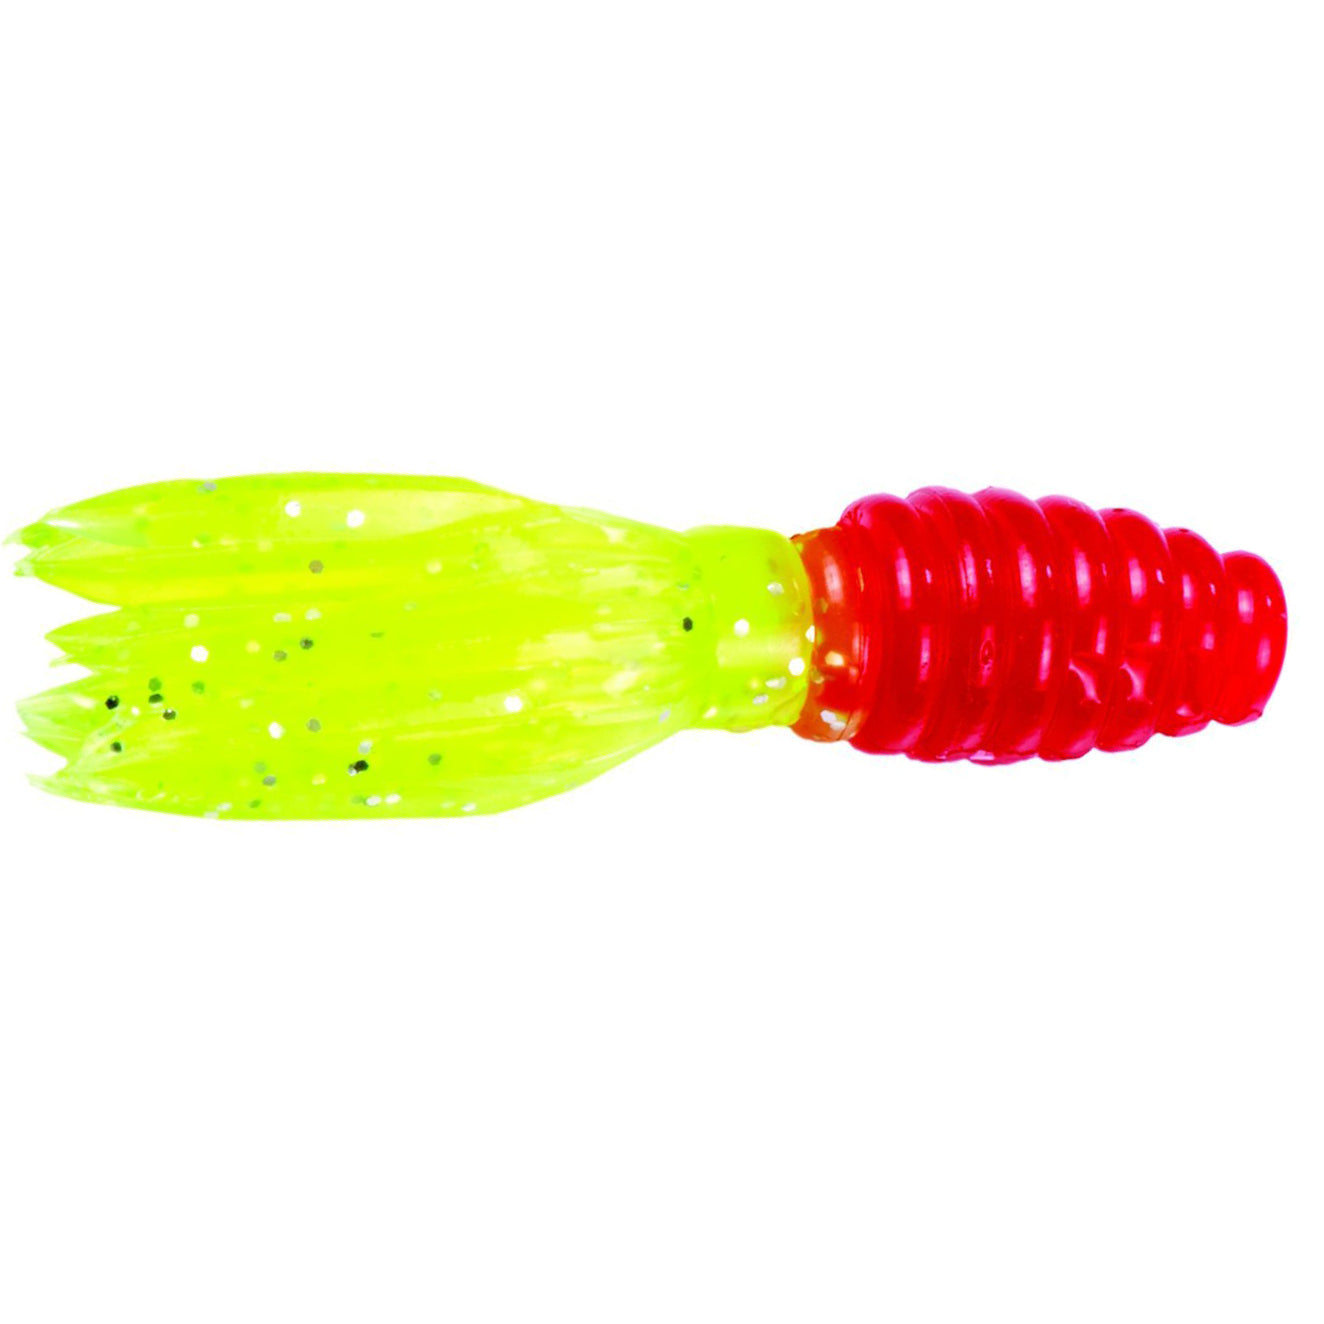 Strike King Mr. Crappie Thunder - Red/Chartreuse Sparkle